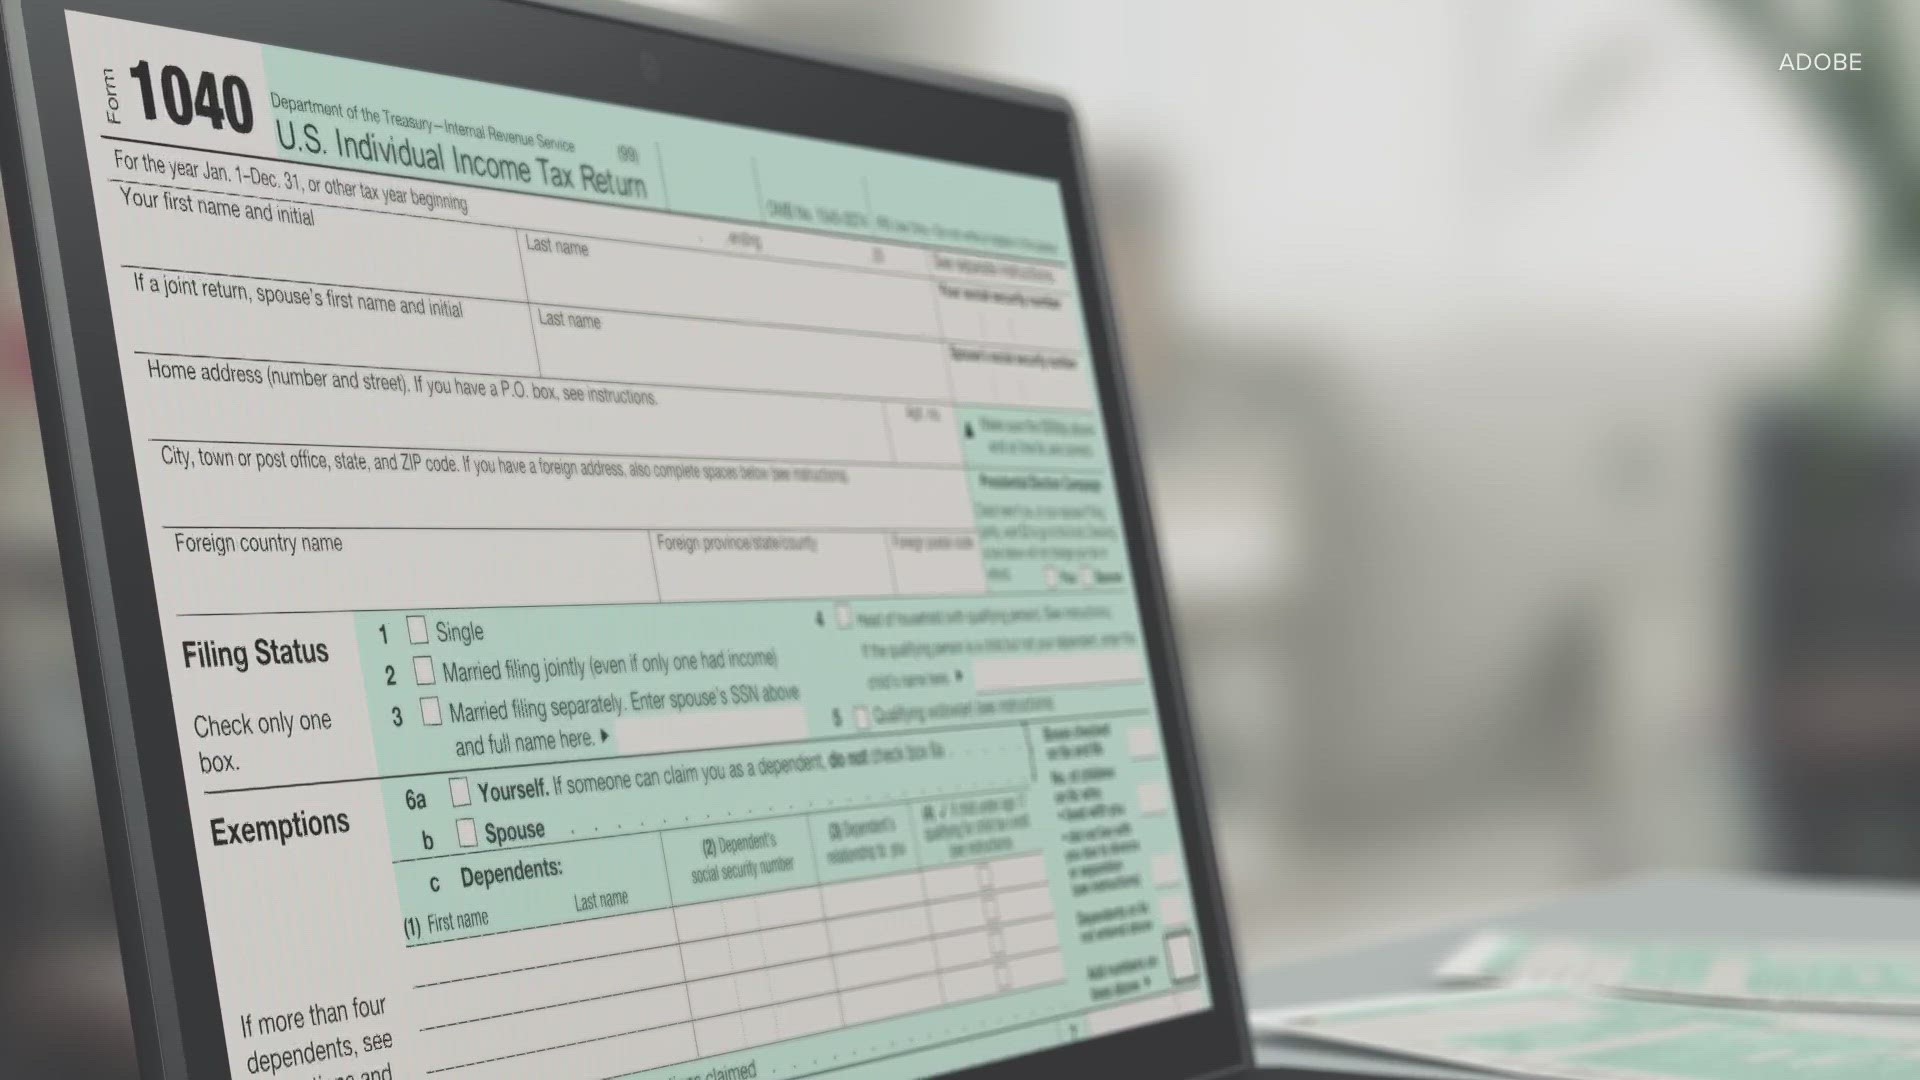 The deadline to file your taxes is April 15. Here’s what you need to know before sitting down to file.